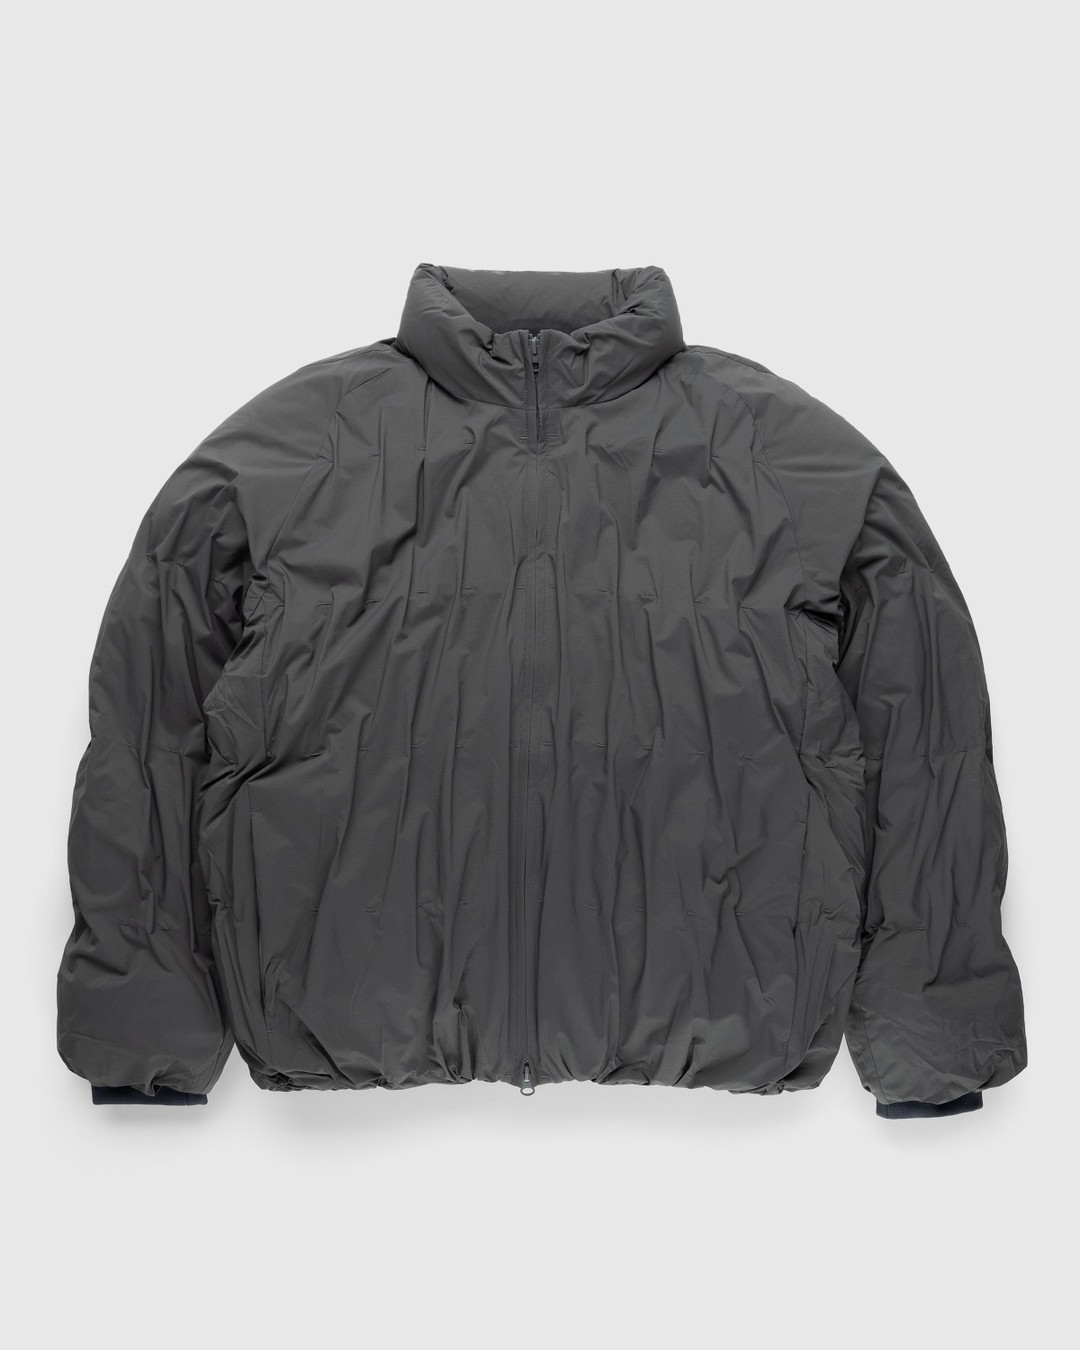 Post Archive Faction (PAF) – 5.1 DOWN RIGHT JACKET